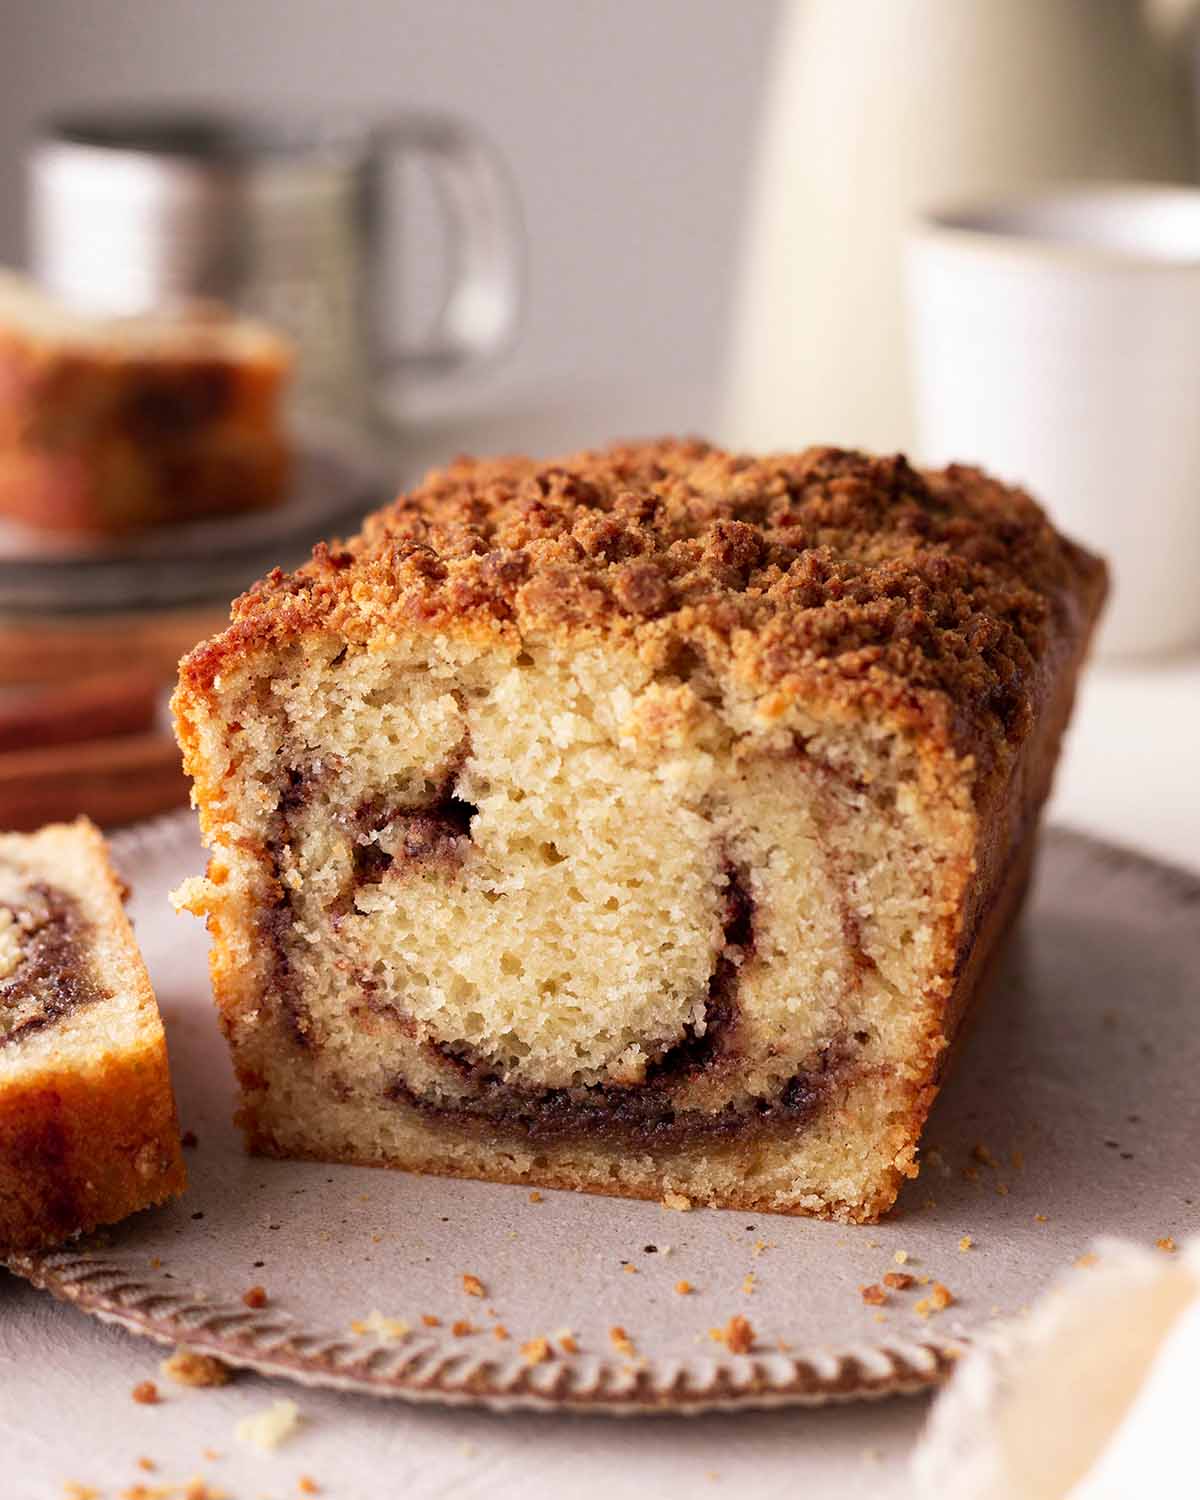 Close up of cinnamon loaf with slice cut off showing swirl pattern.